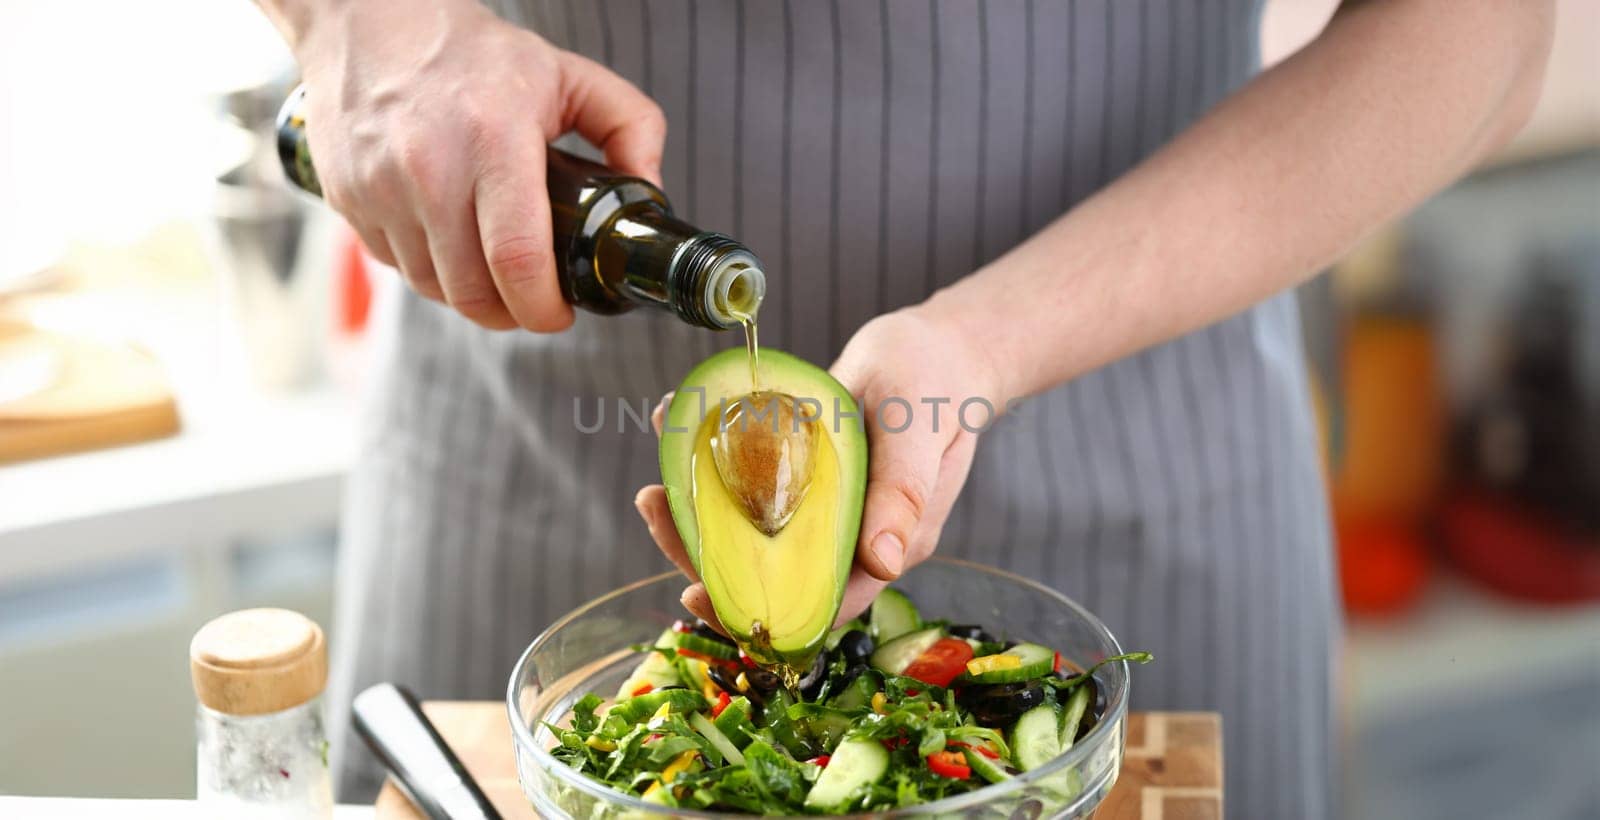 Exotic Avocado Seed Ingredient Poured Olive Oil. Male Hands Holding Half Tropical Fruit. Chef Cooking Healthy Vegetable Salad with Greens, Cucumber and Tomato. Dieting Culinary Food Horizontal Photo